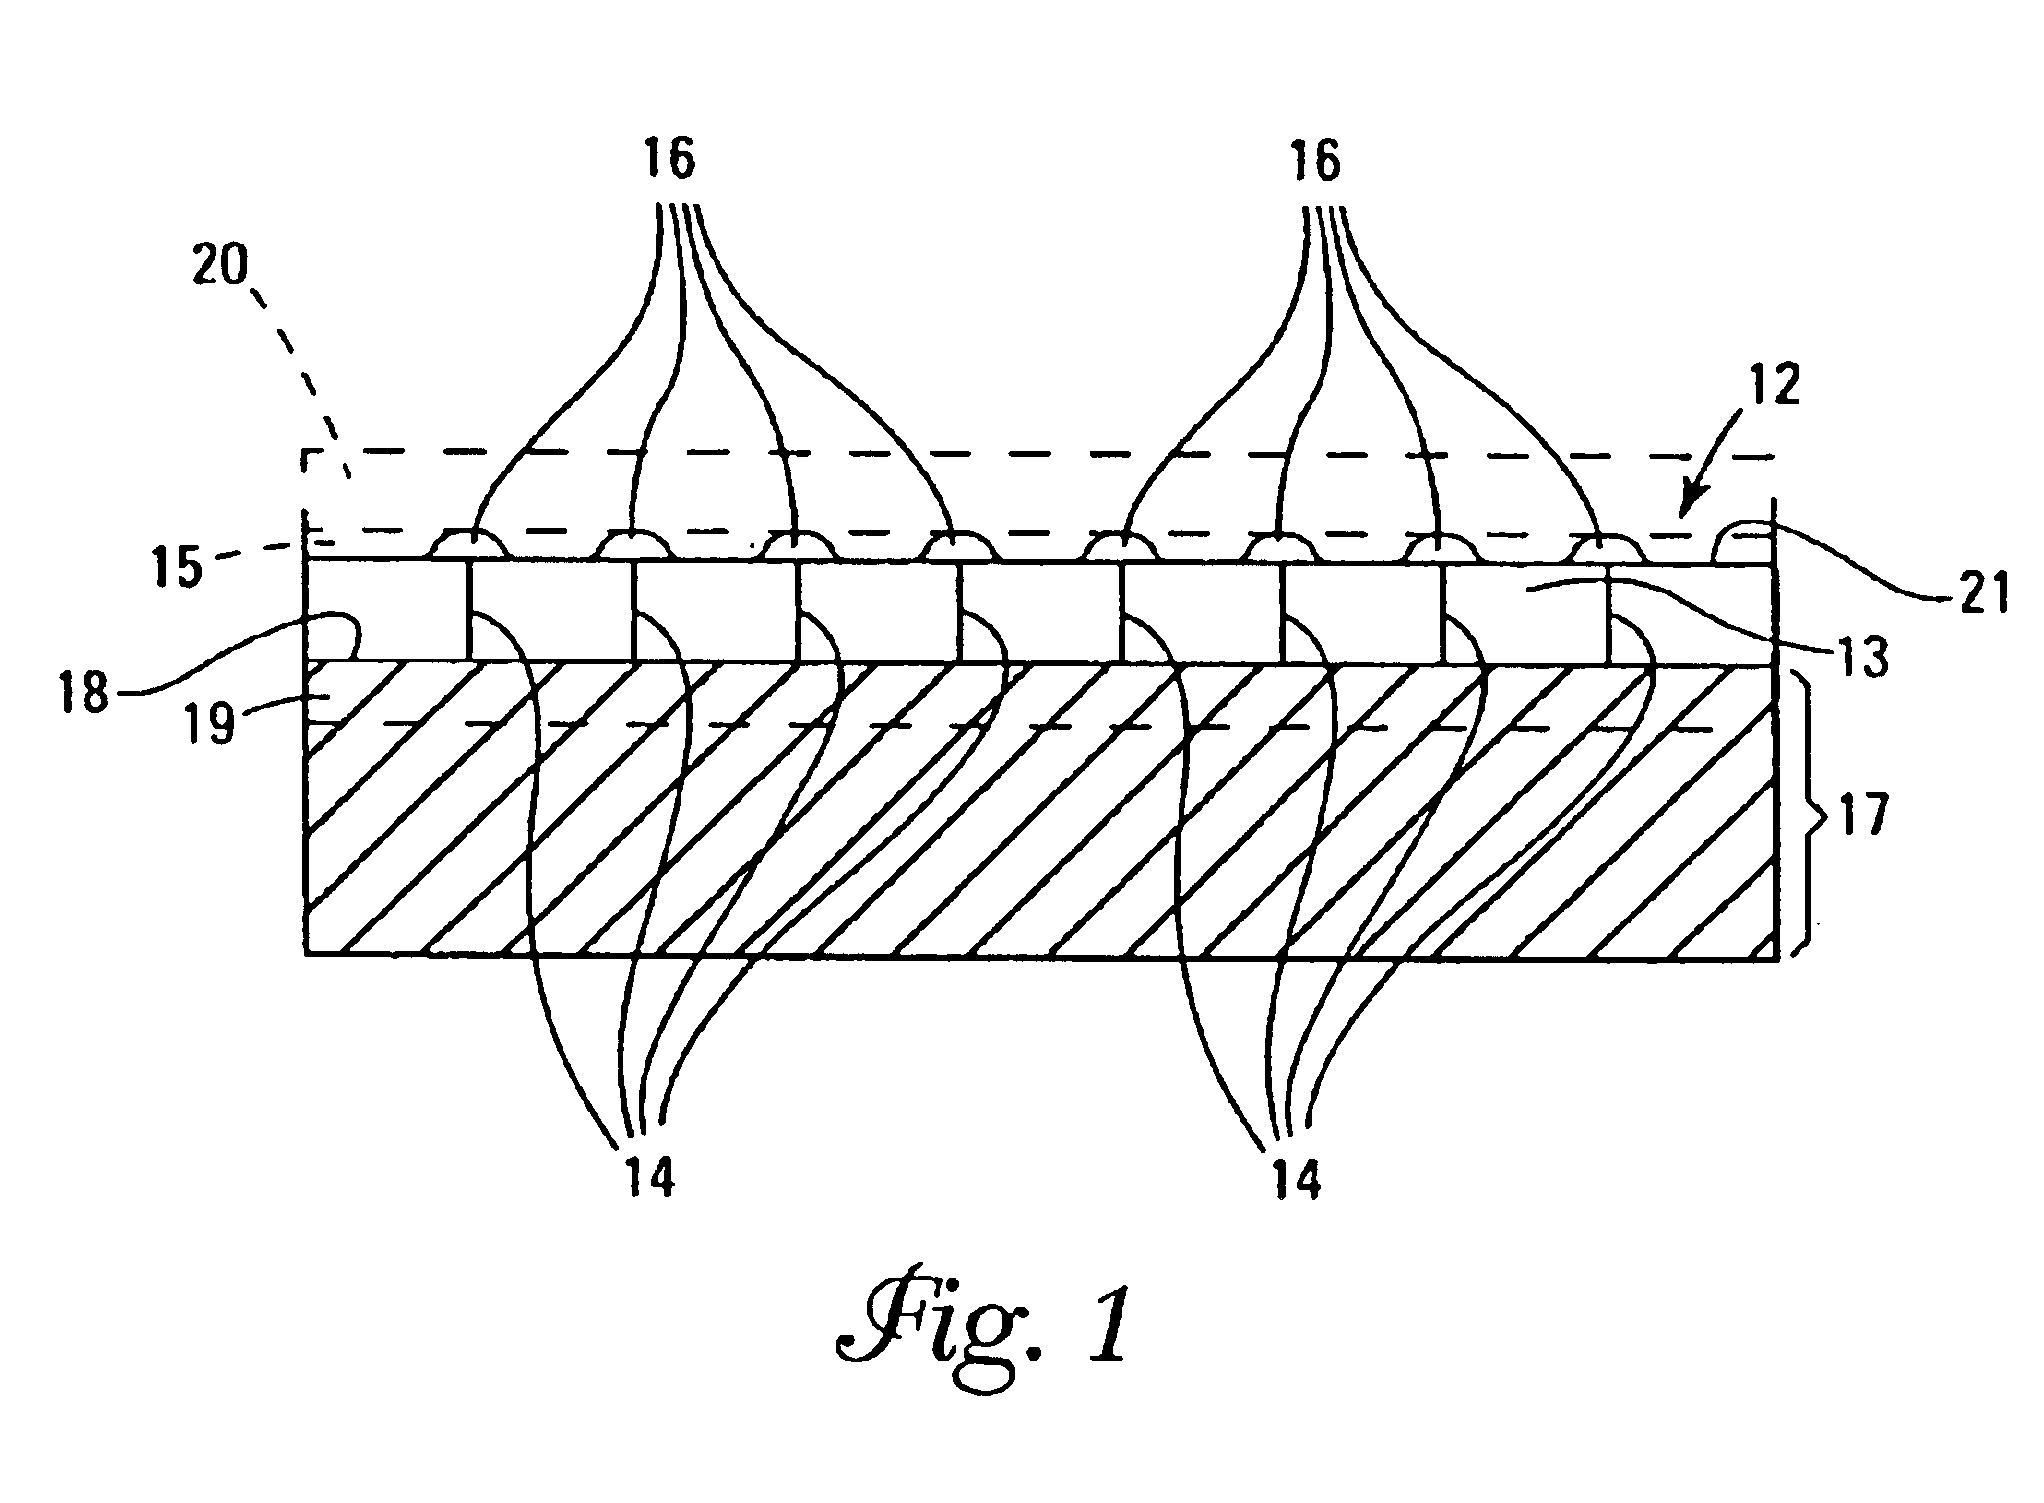 Conductive semiconductor structures containing metal oxide regions